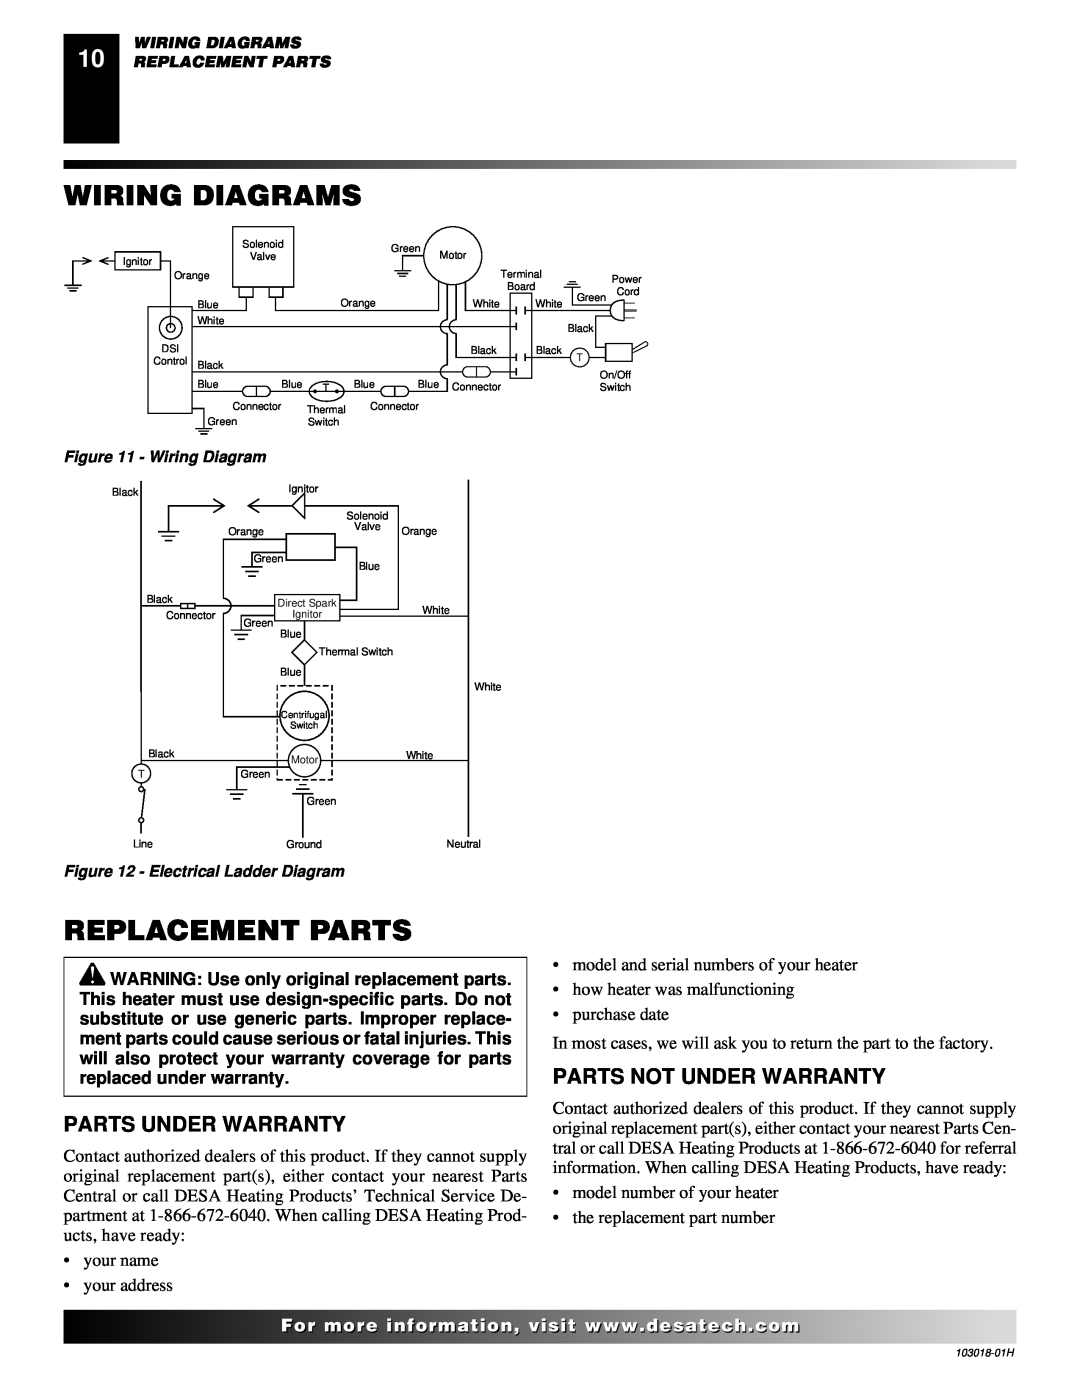 Desa BLP375AT owner manual Wiring Diagrams, Replacement Parts, Parts Under Warranty, Parts Not Under Warranty 